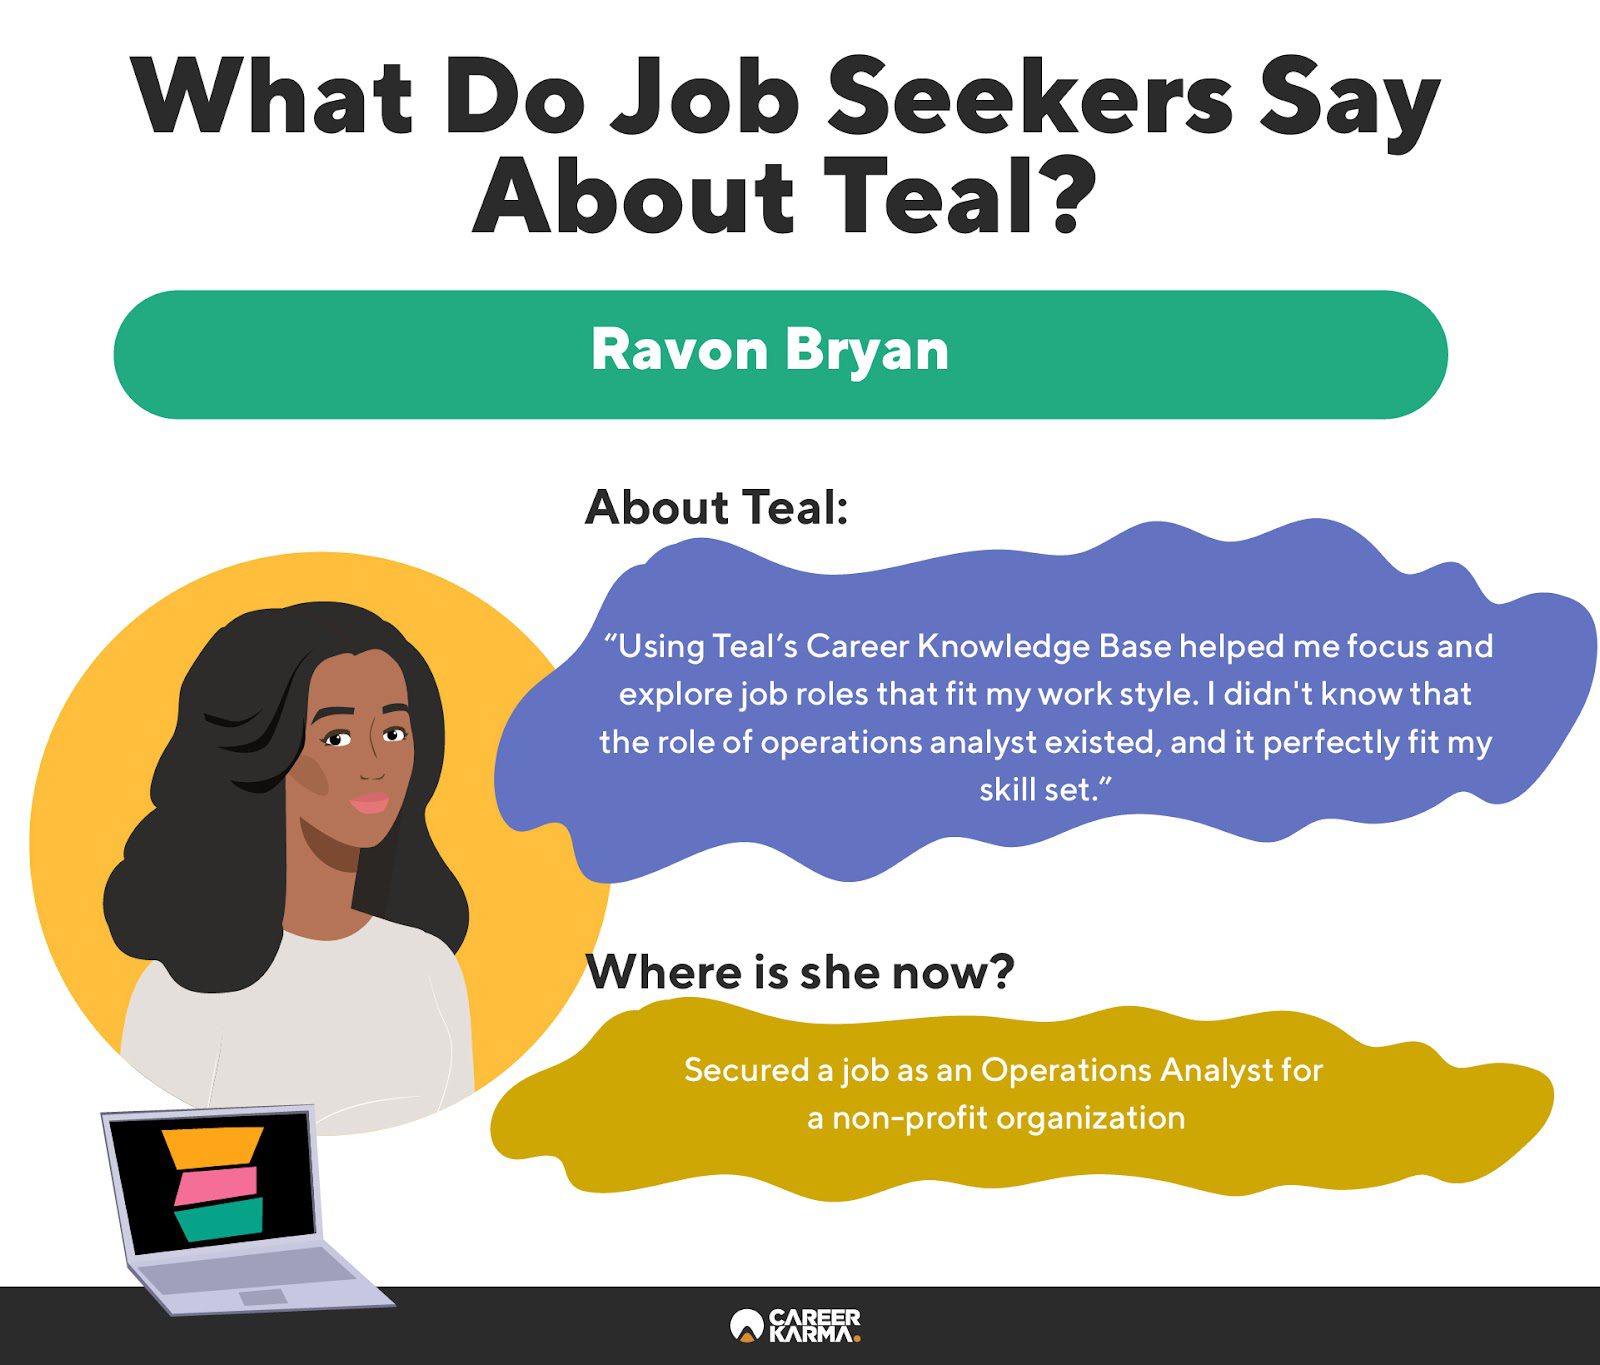 An infographic highlighting a former job seeker’s review of Teal 